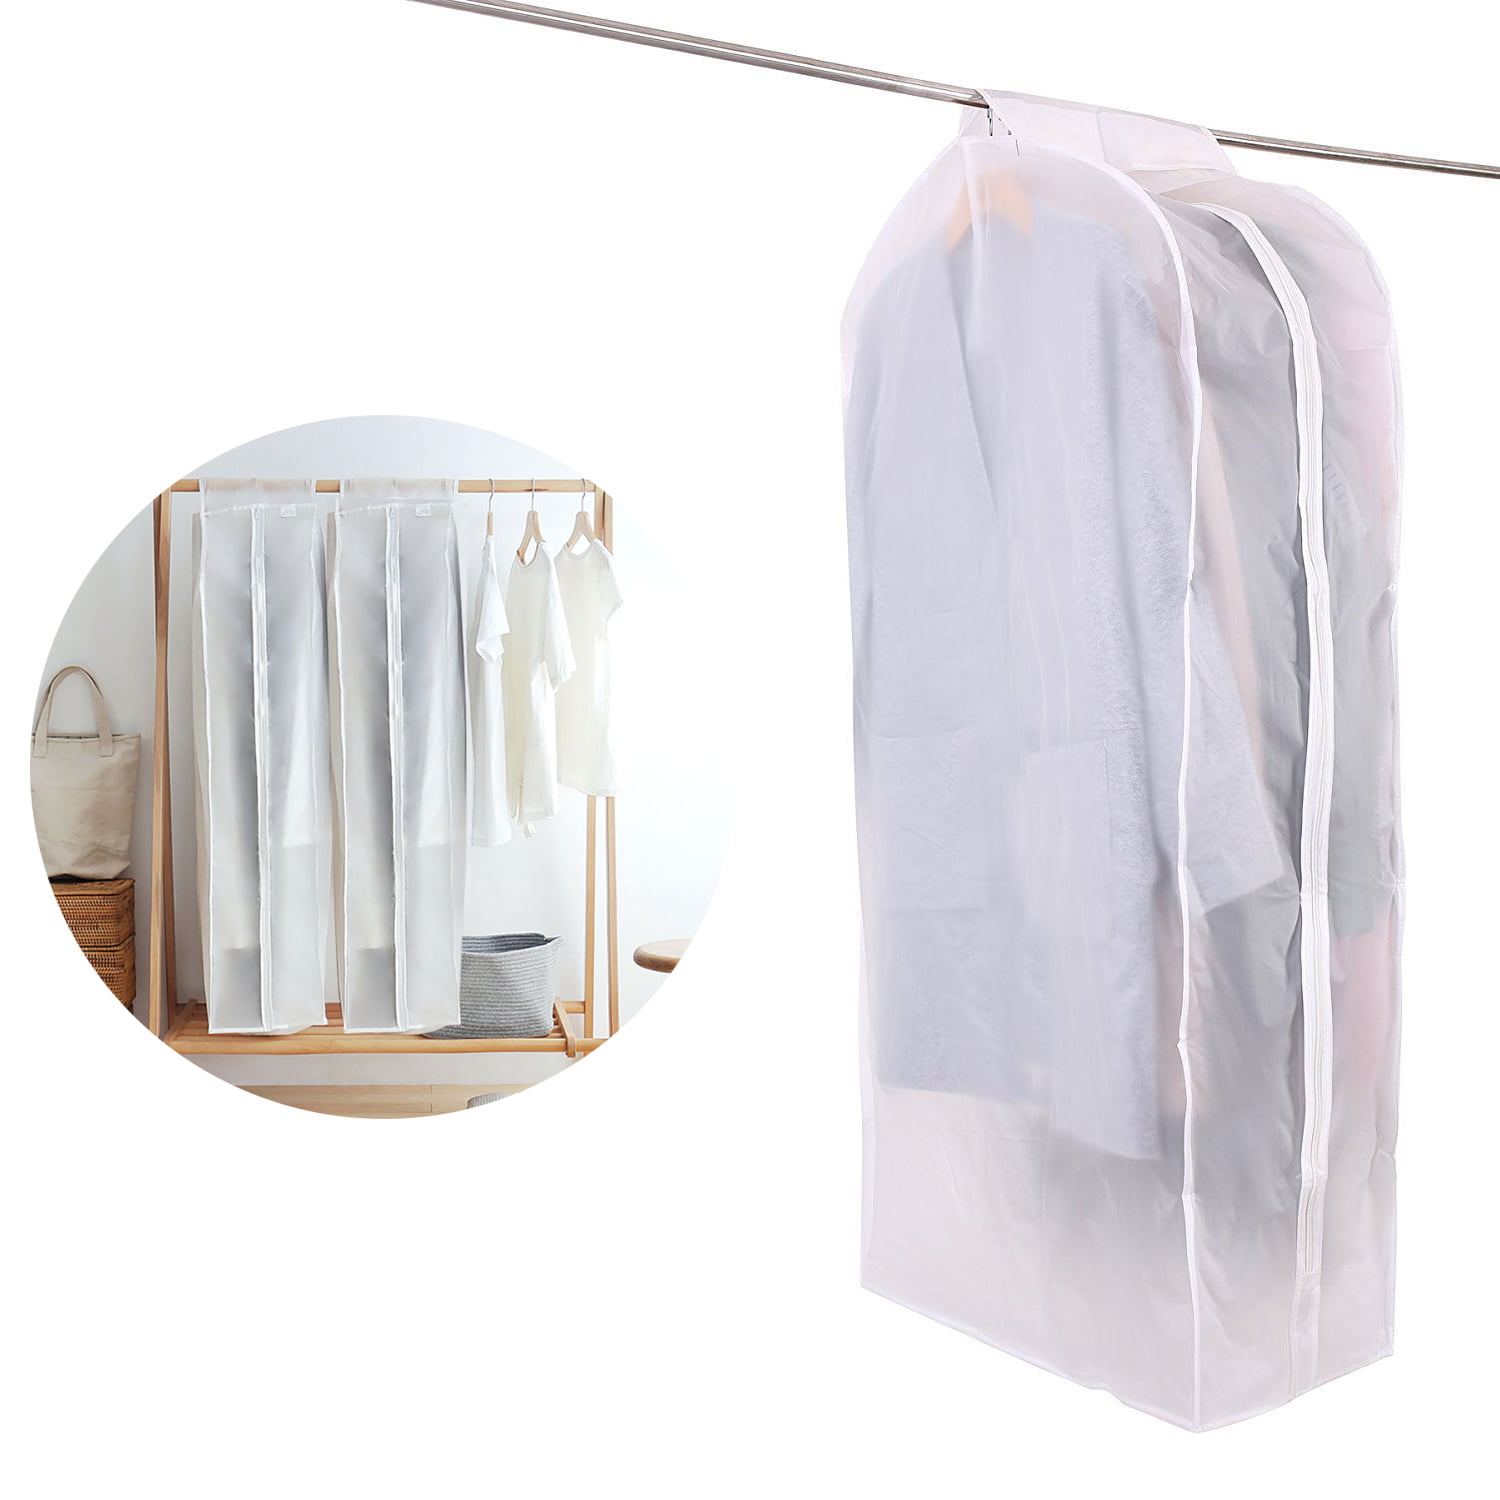 Details about   Garment Bags for Storage Dust-Proof Suit Cover with Sturdy...